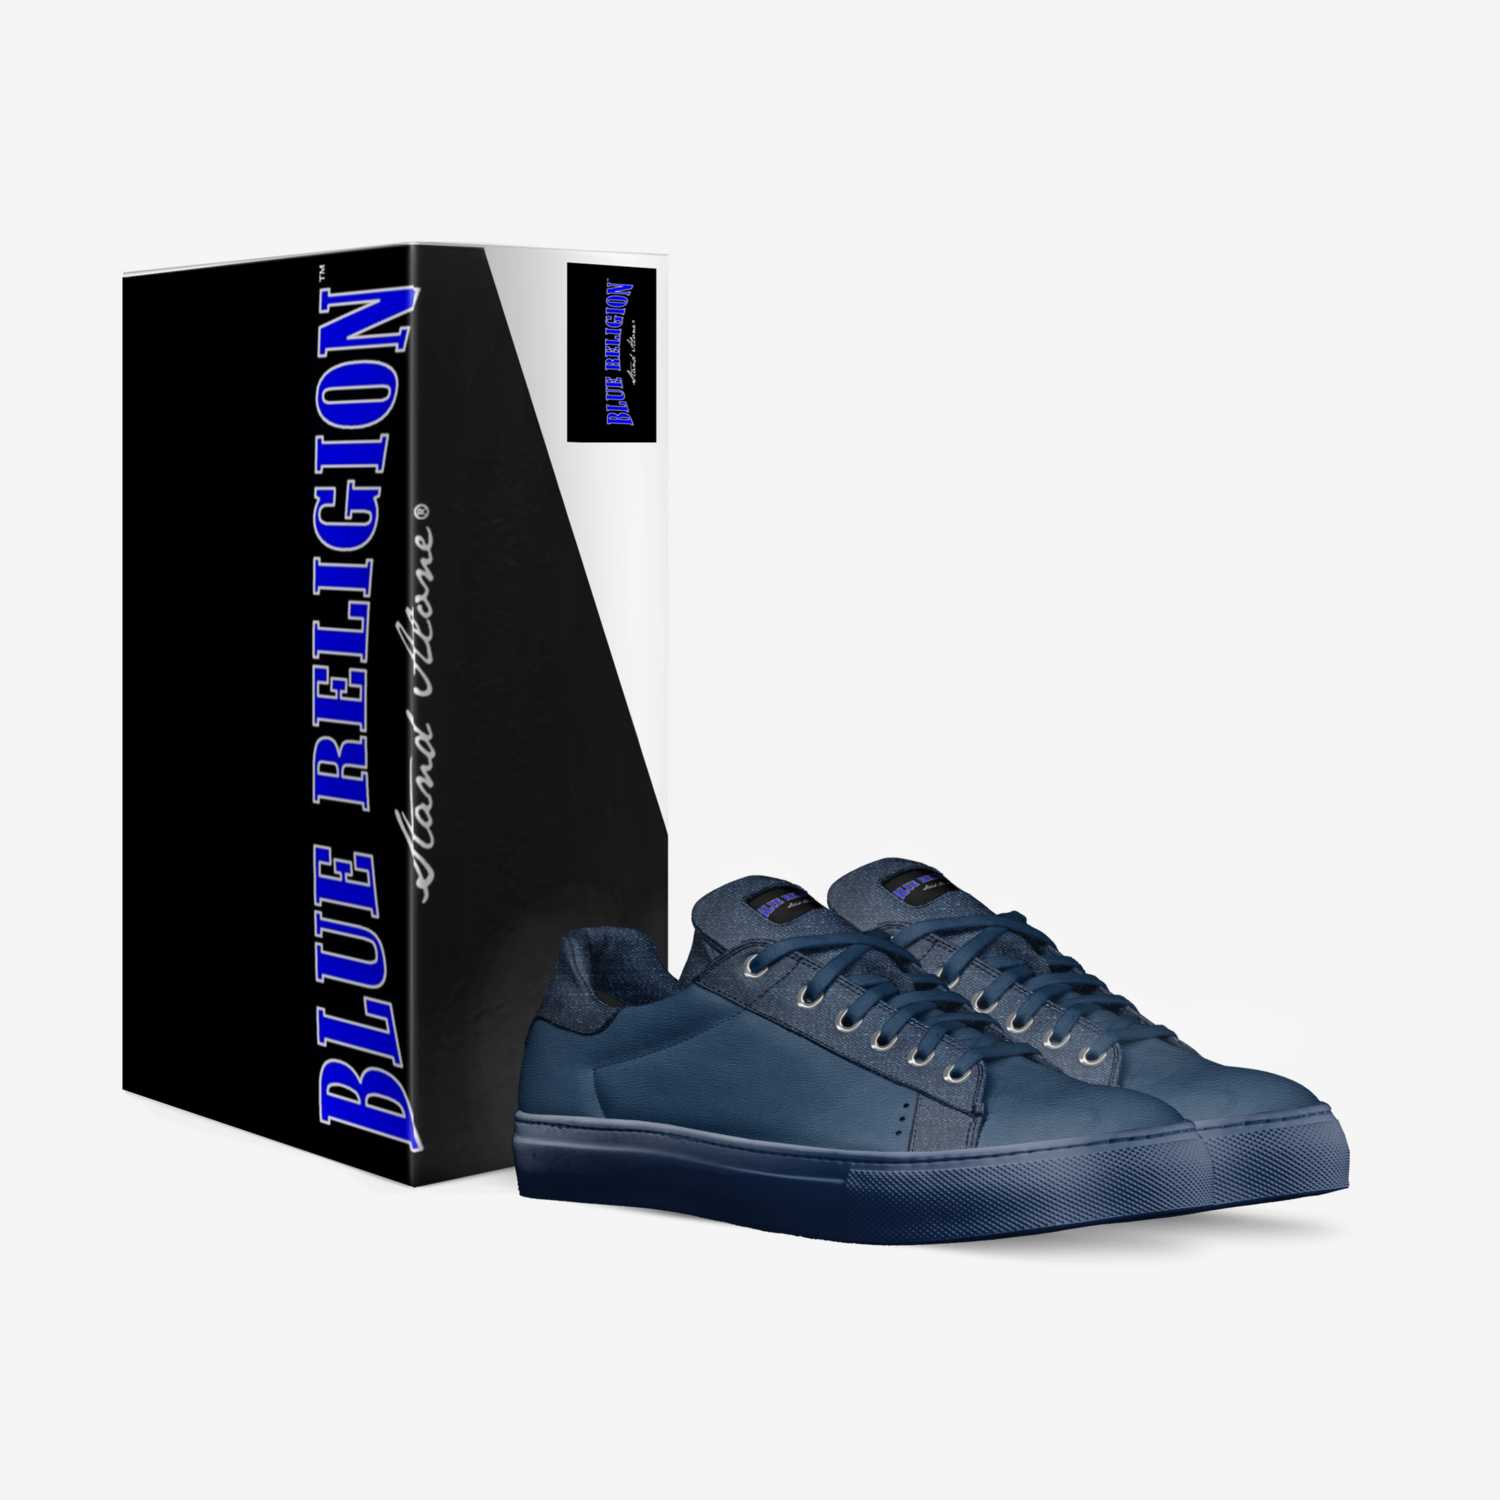 Blue Religion  custom made in Italy shoes by Bam Deuce | Box view